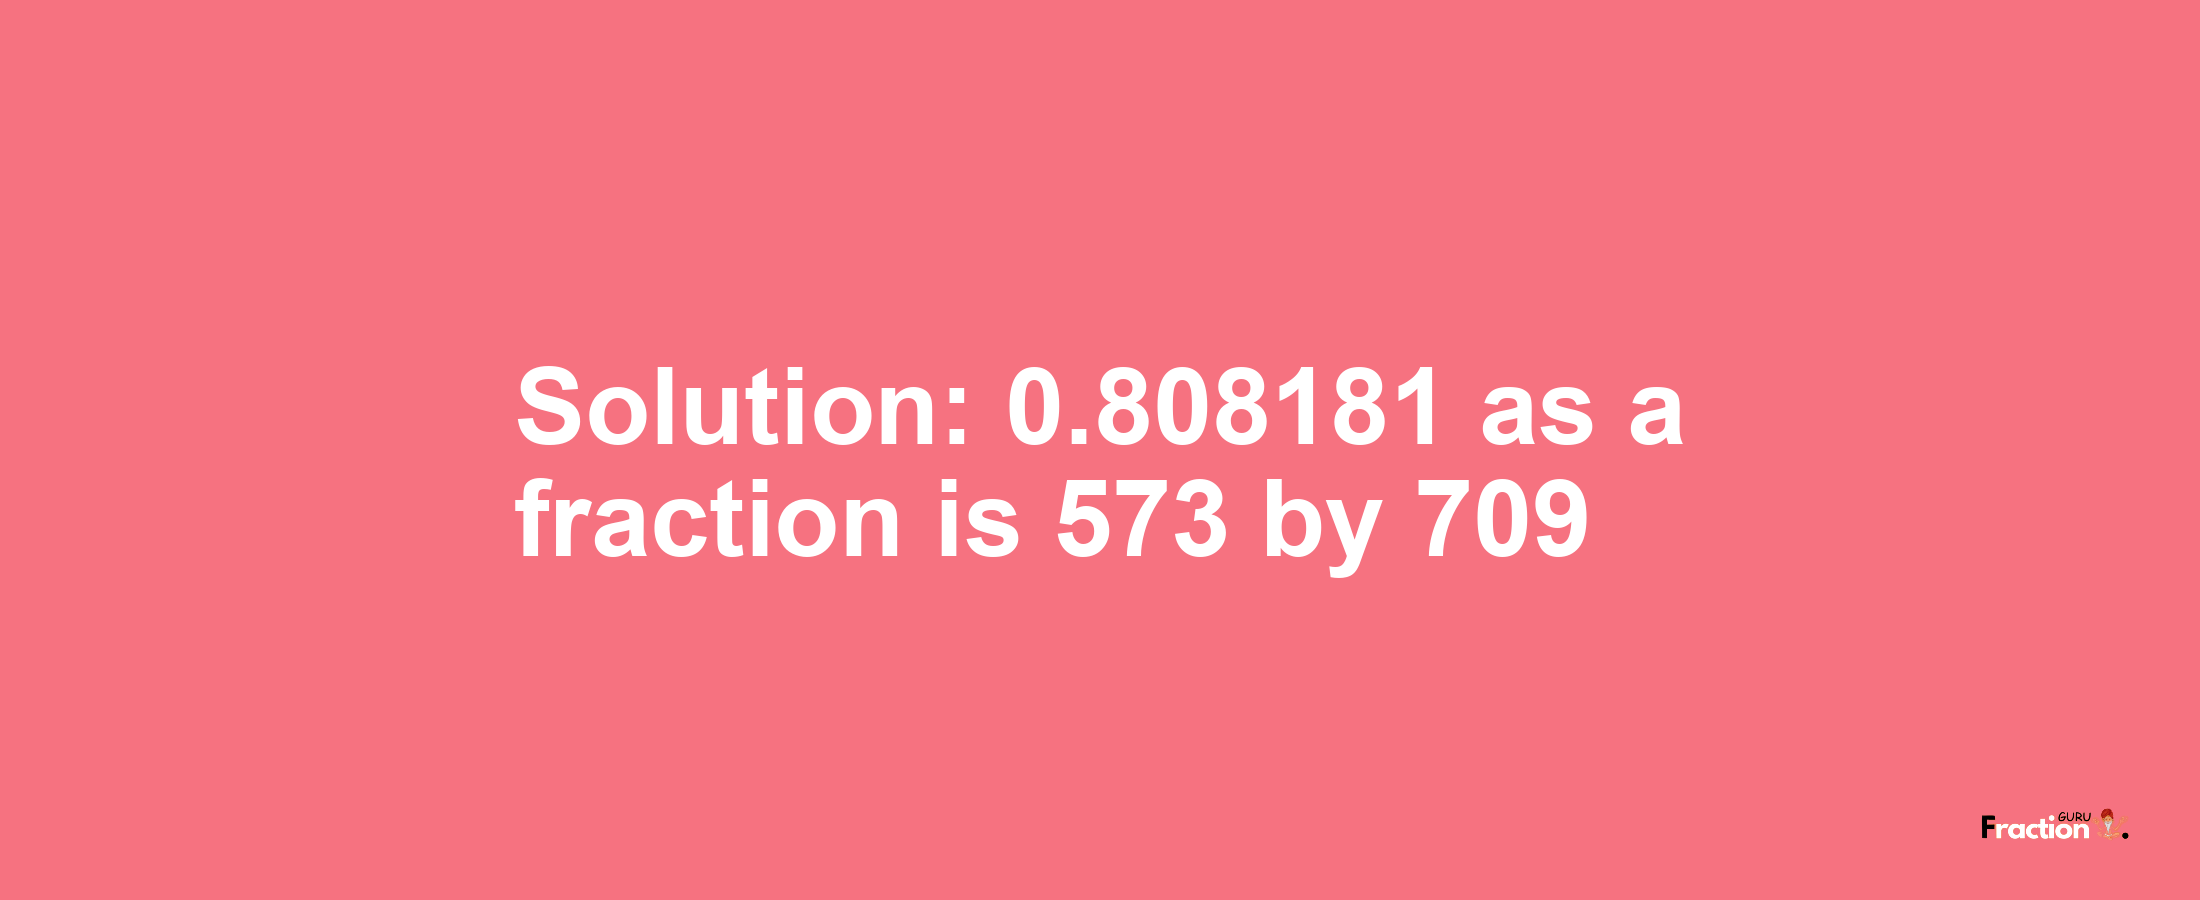 Solution:0.808181 as a fraction is 573/709